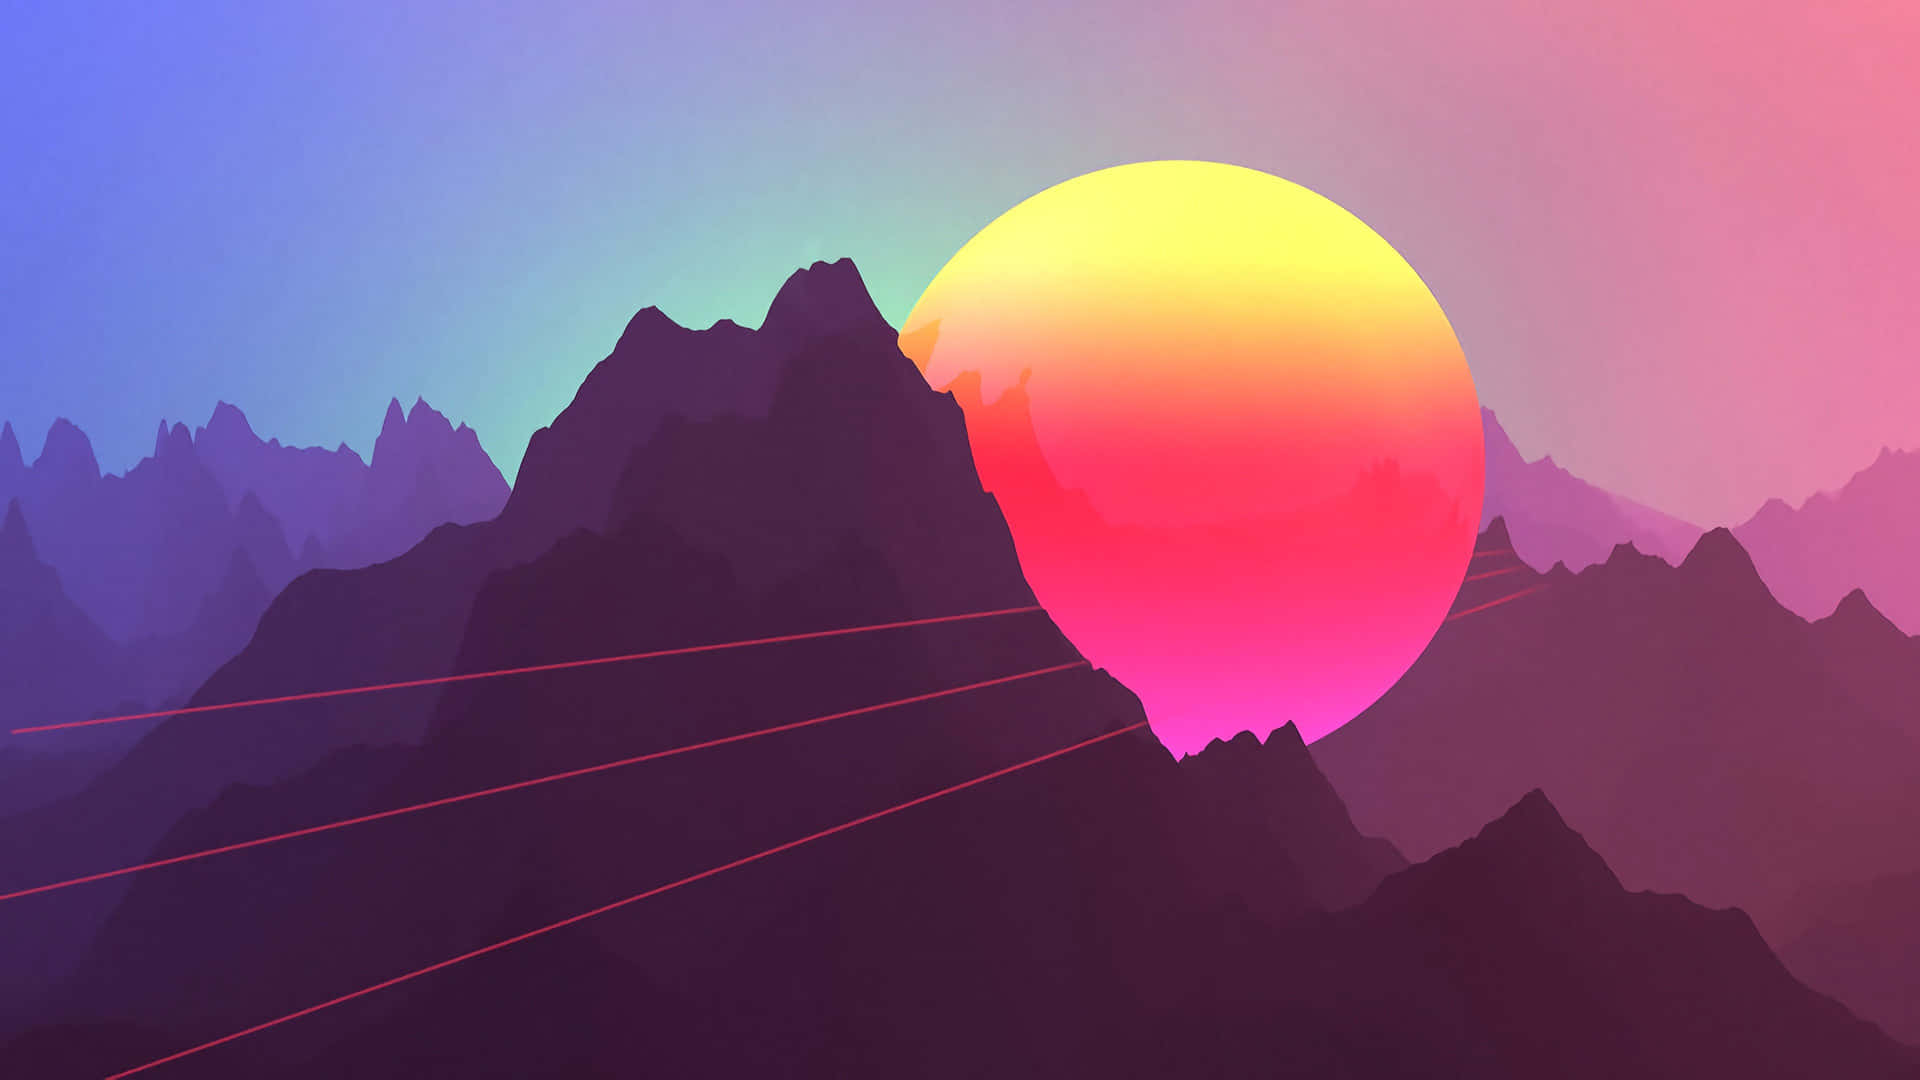 A Colorful Abstract Image Of Mountains And A Sun Wallpaper